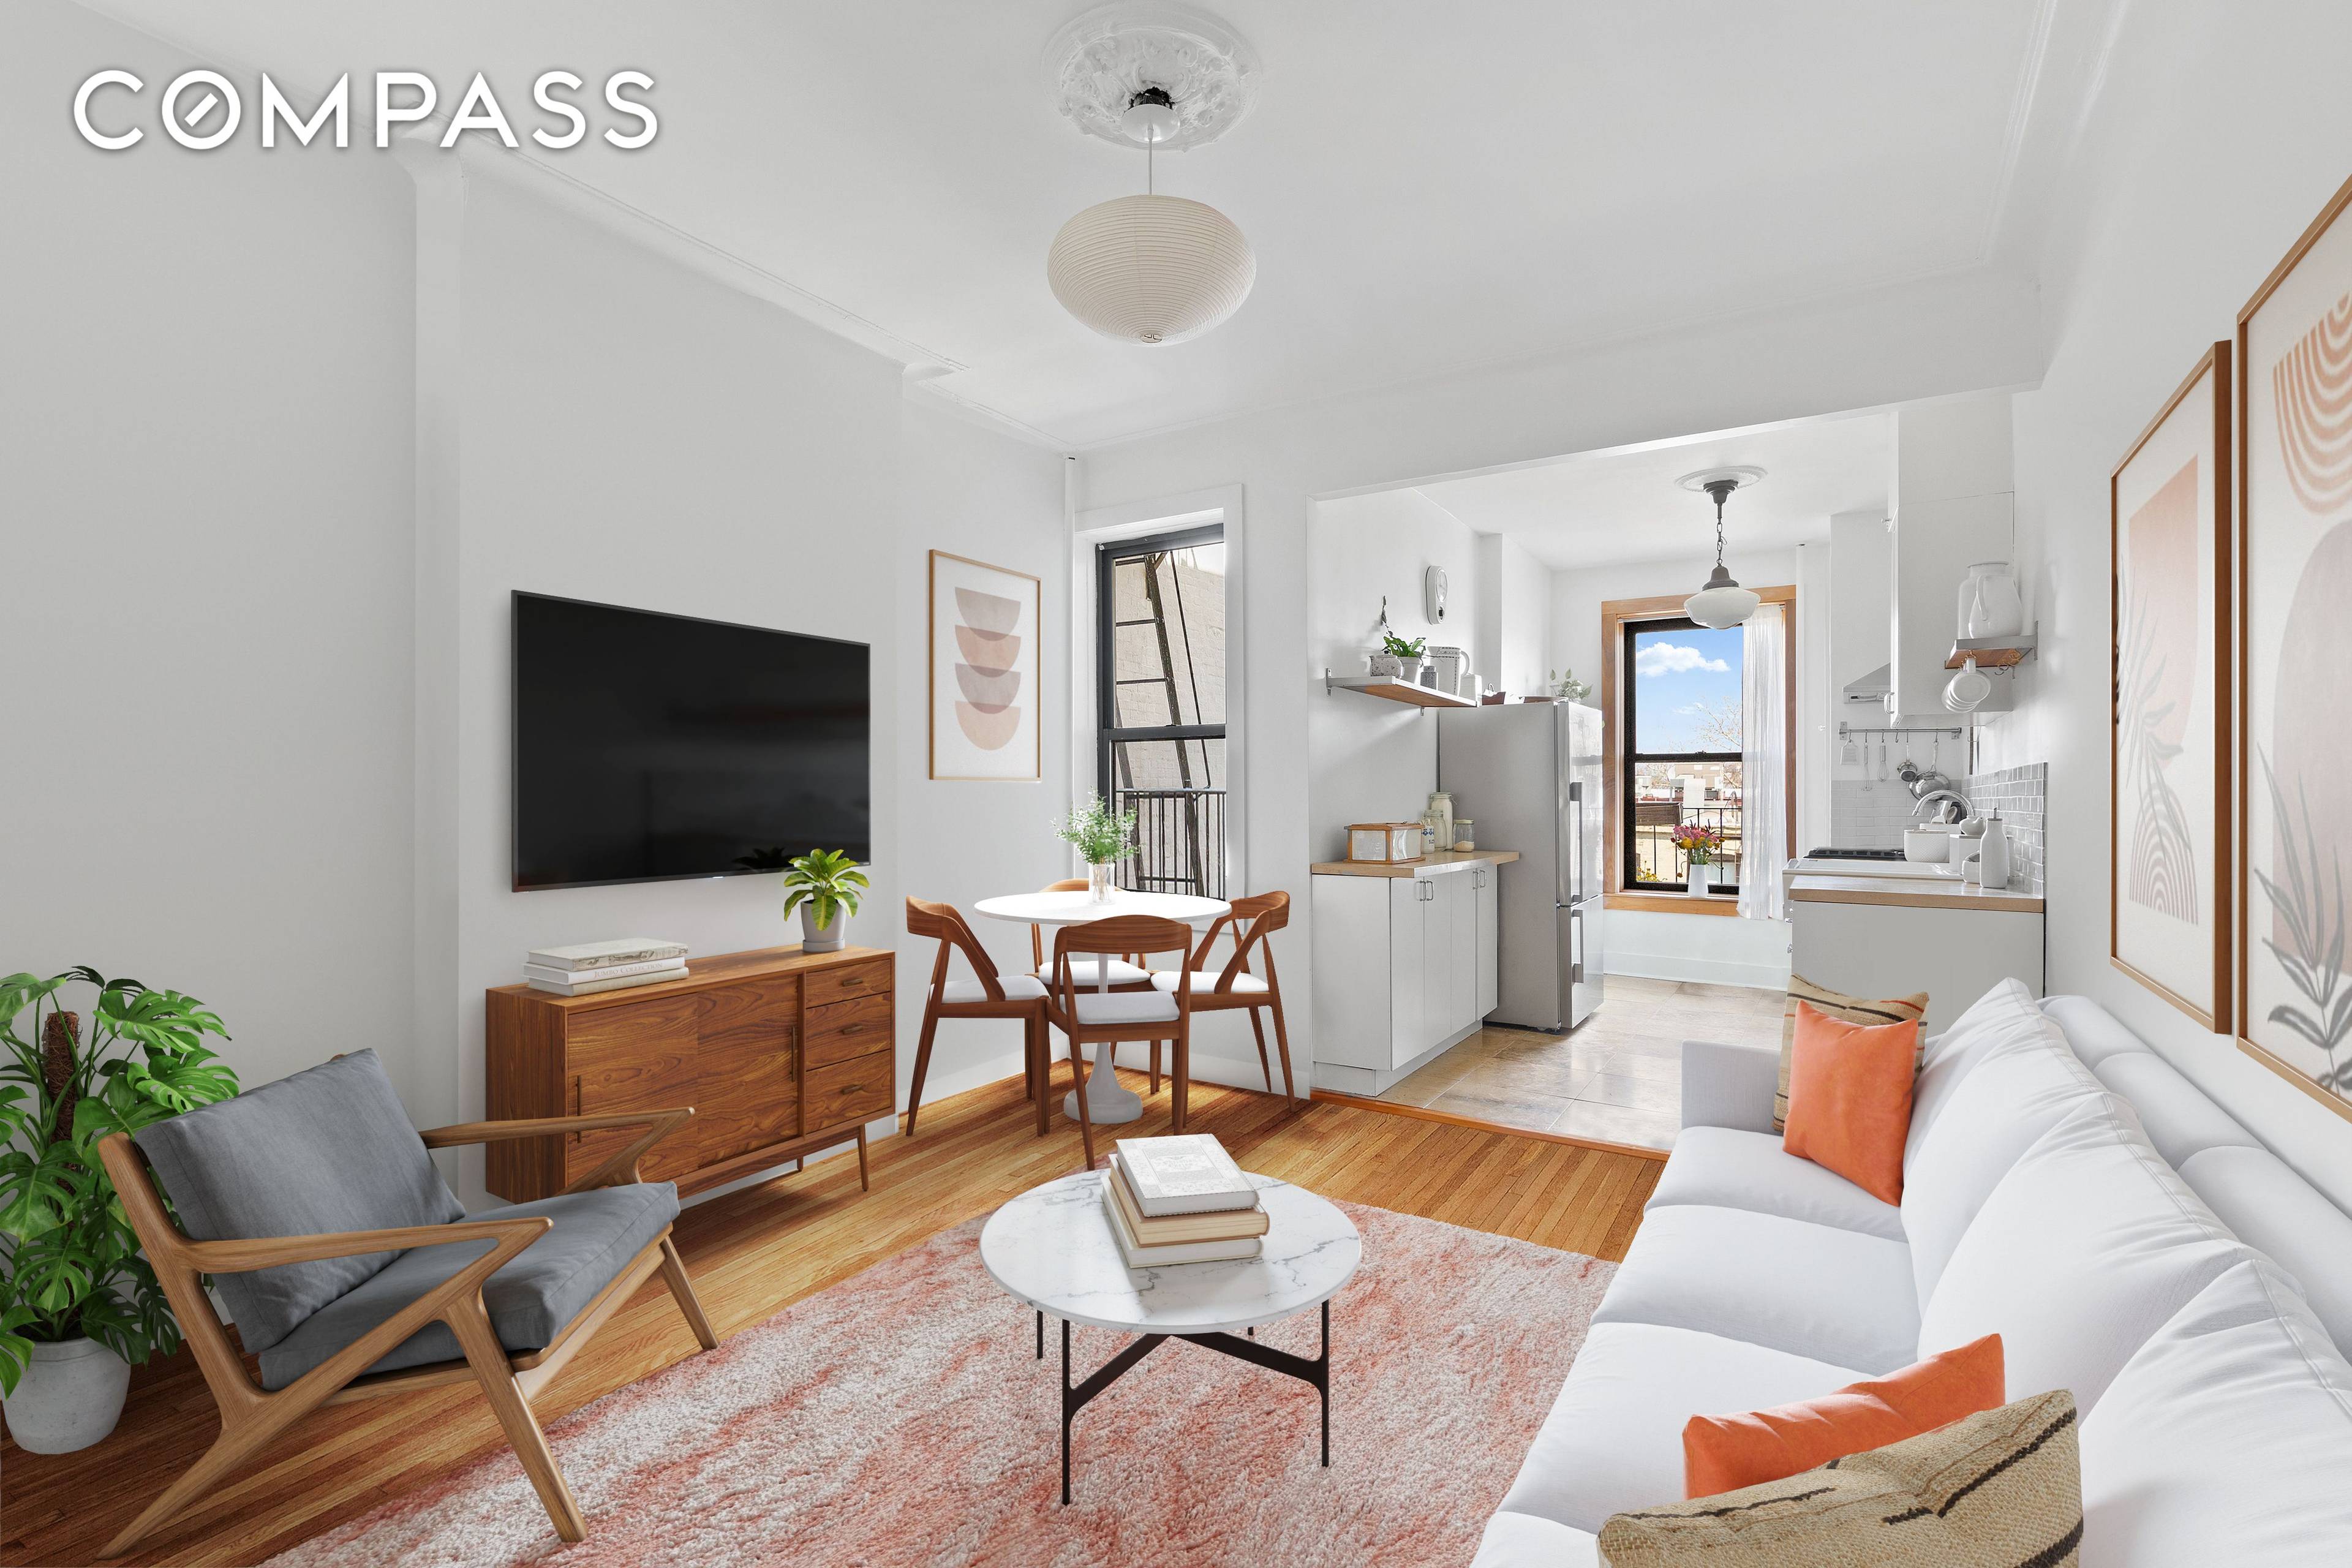 Located on one of Park Slope's prettiest tree lined blocks is where you will find this beautiful home that is a perfect blend of original details mixed with modern charm.